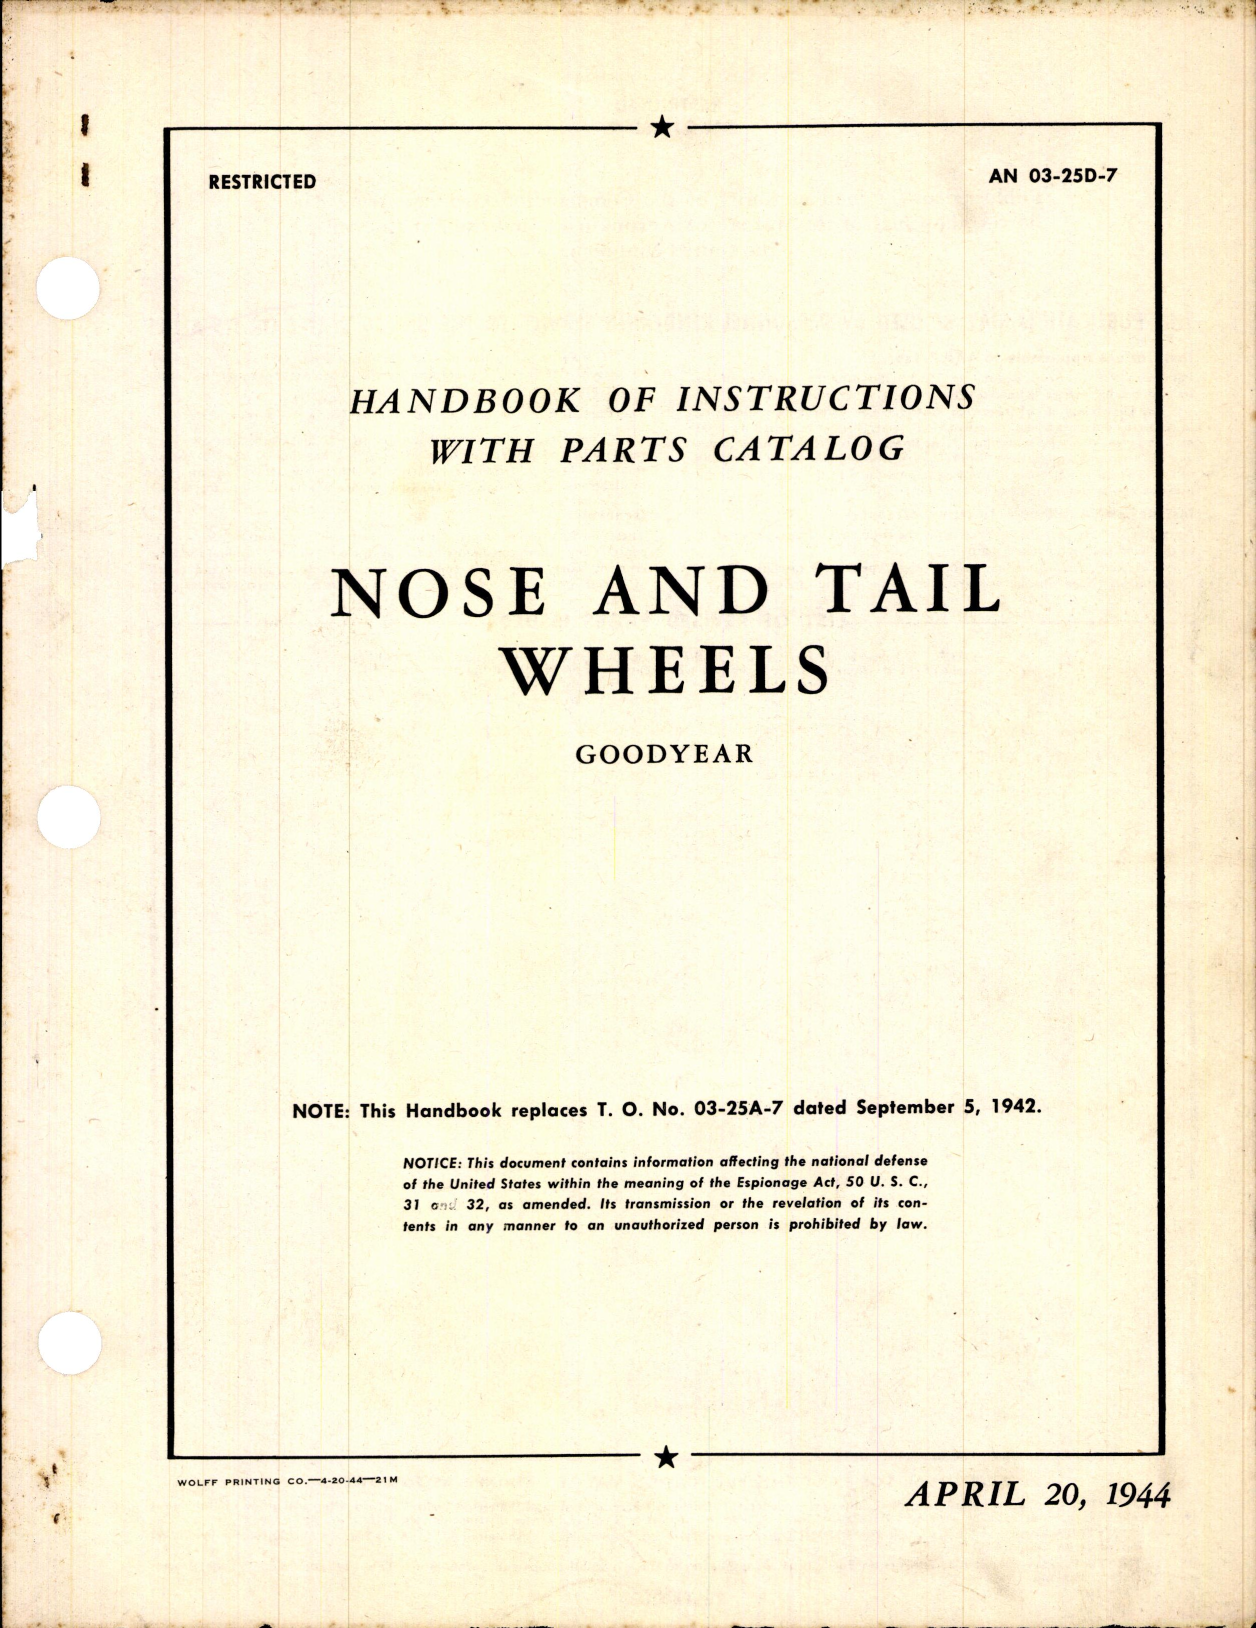 Sample page 1 from AirCorps Library document: Instructions with Parts Catalog for Nose & Tail Wheels